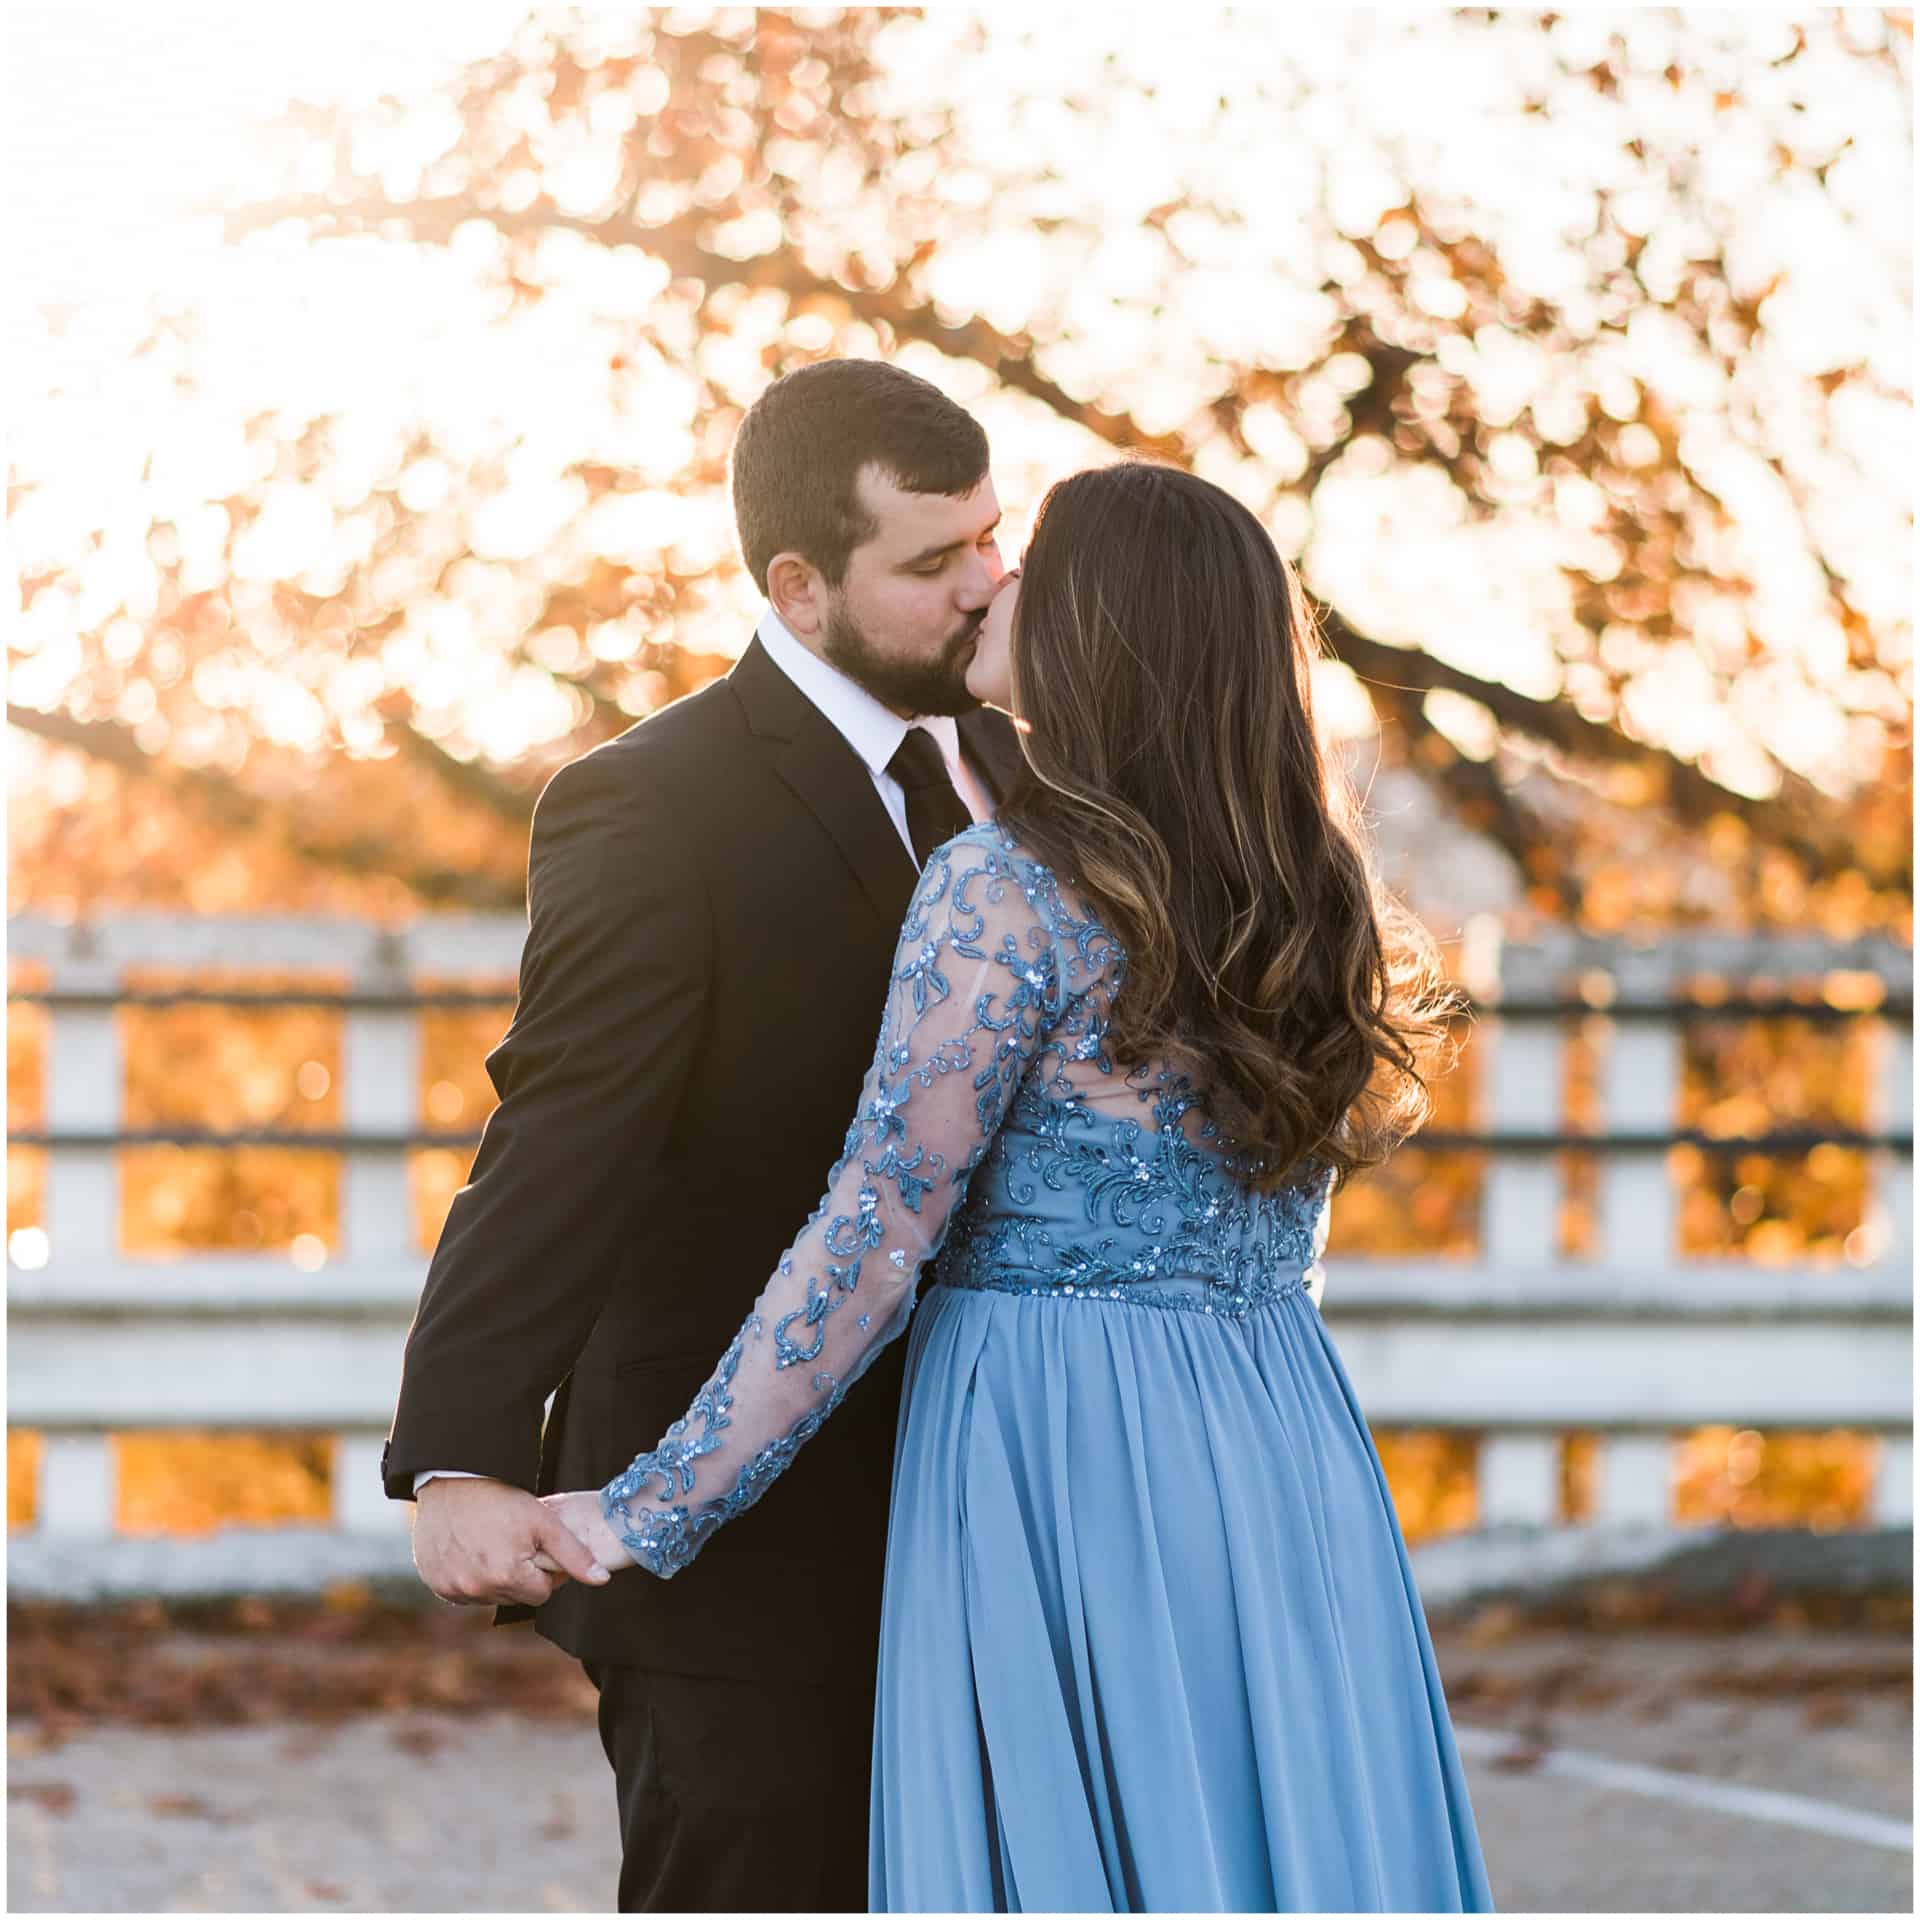 Fall engagement session - candid kisses